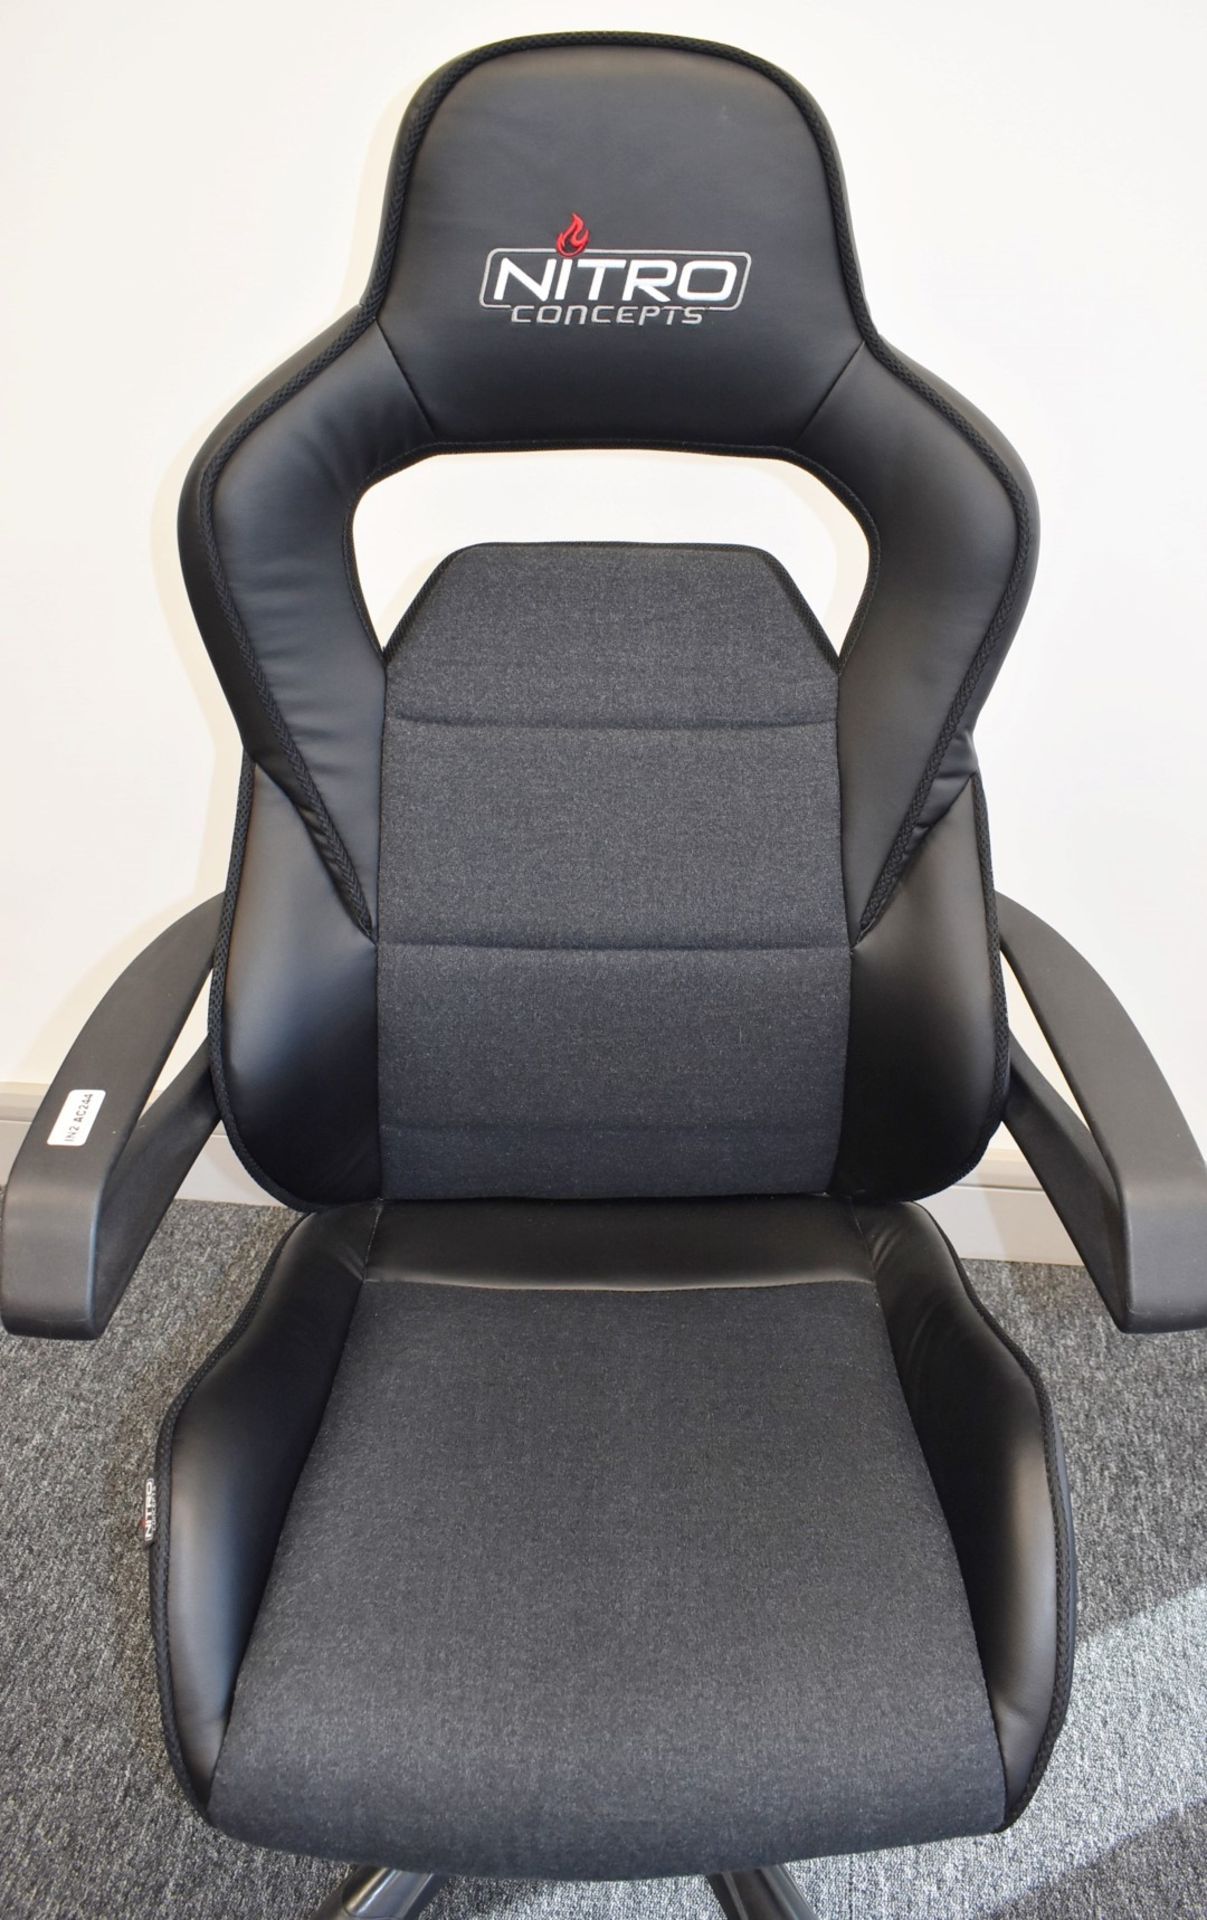 1 x Nitro Concepts Evo Gaming Swivel Chair - Faux Leather and Fabric Upholstery in Black - Gas - Image 5 of 8